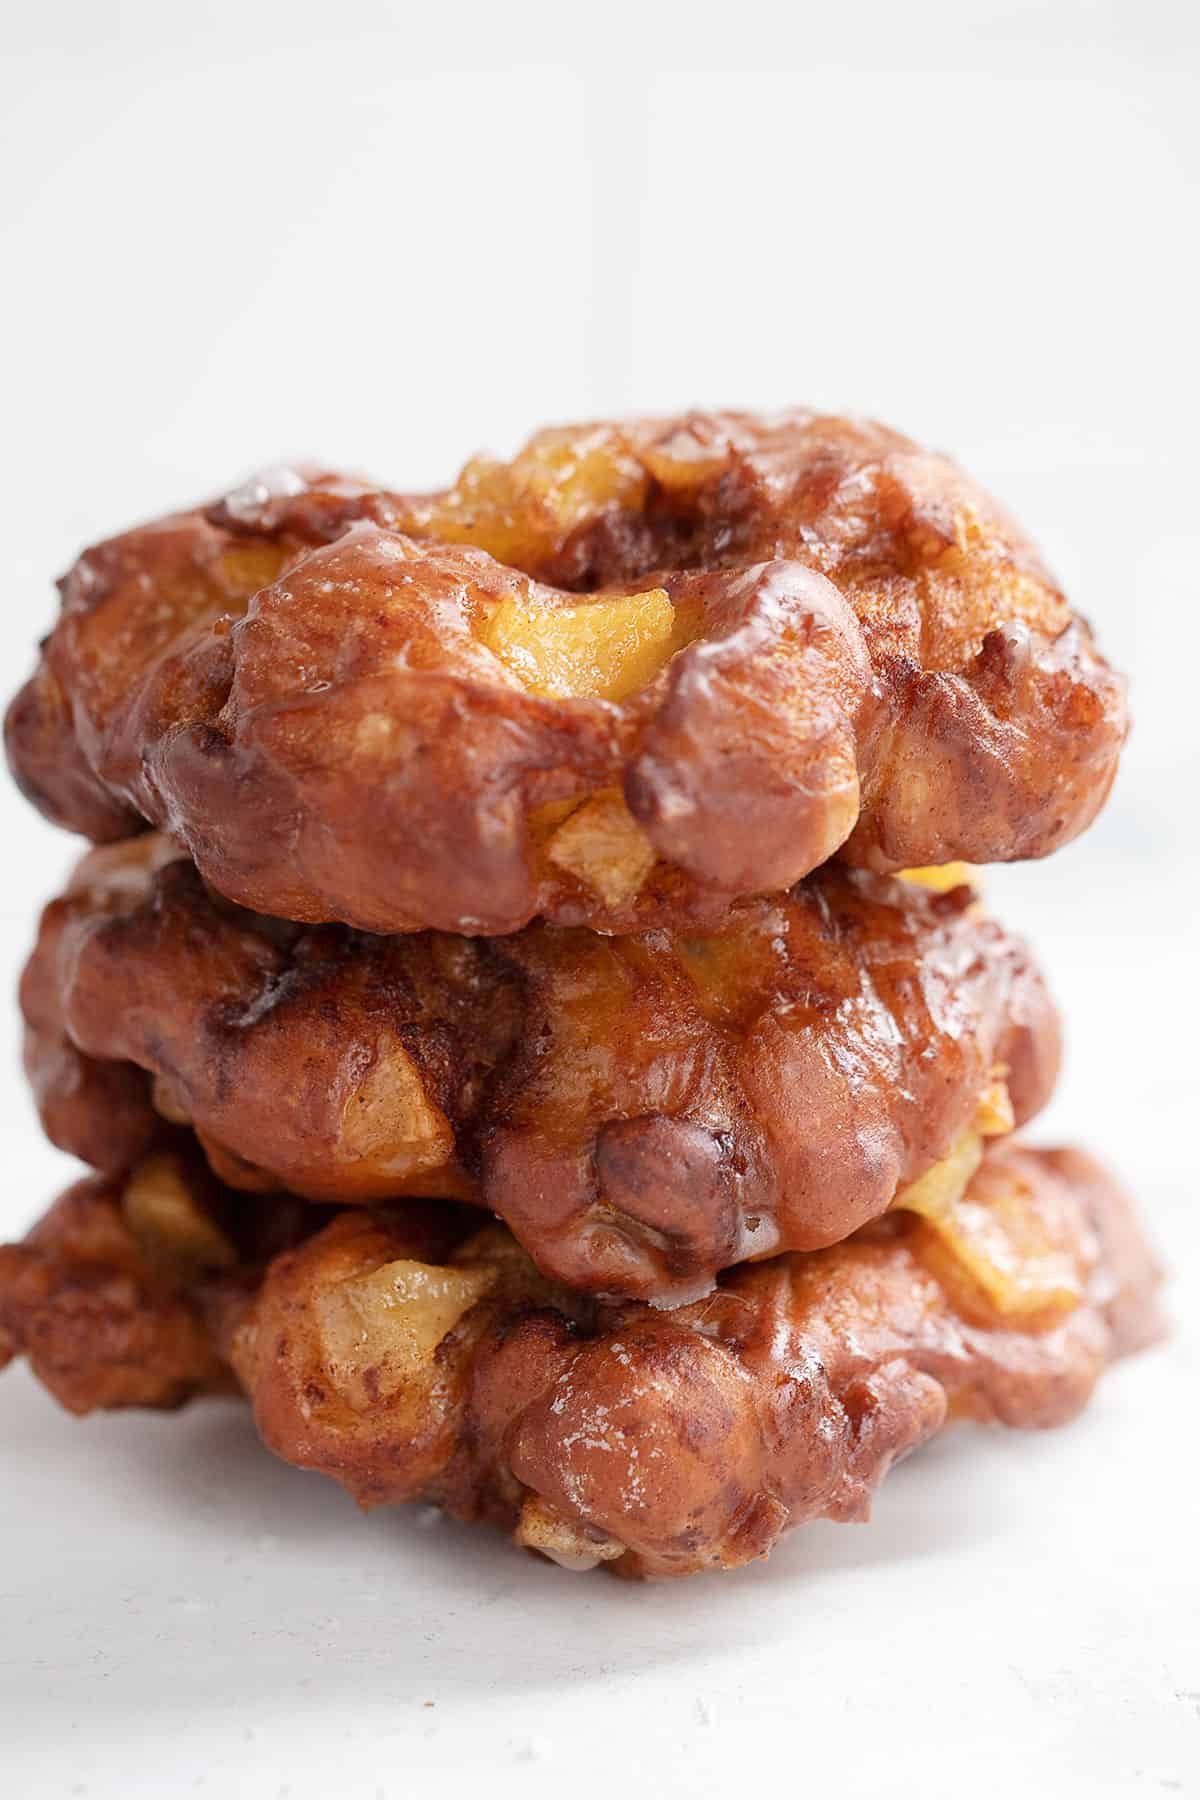 apple fritter yeast doughnuts stacked